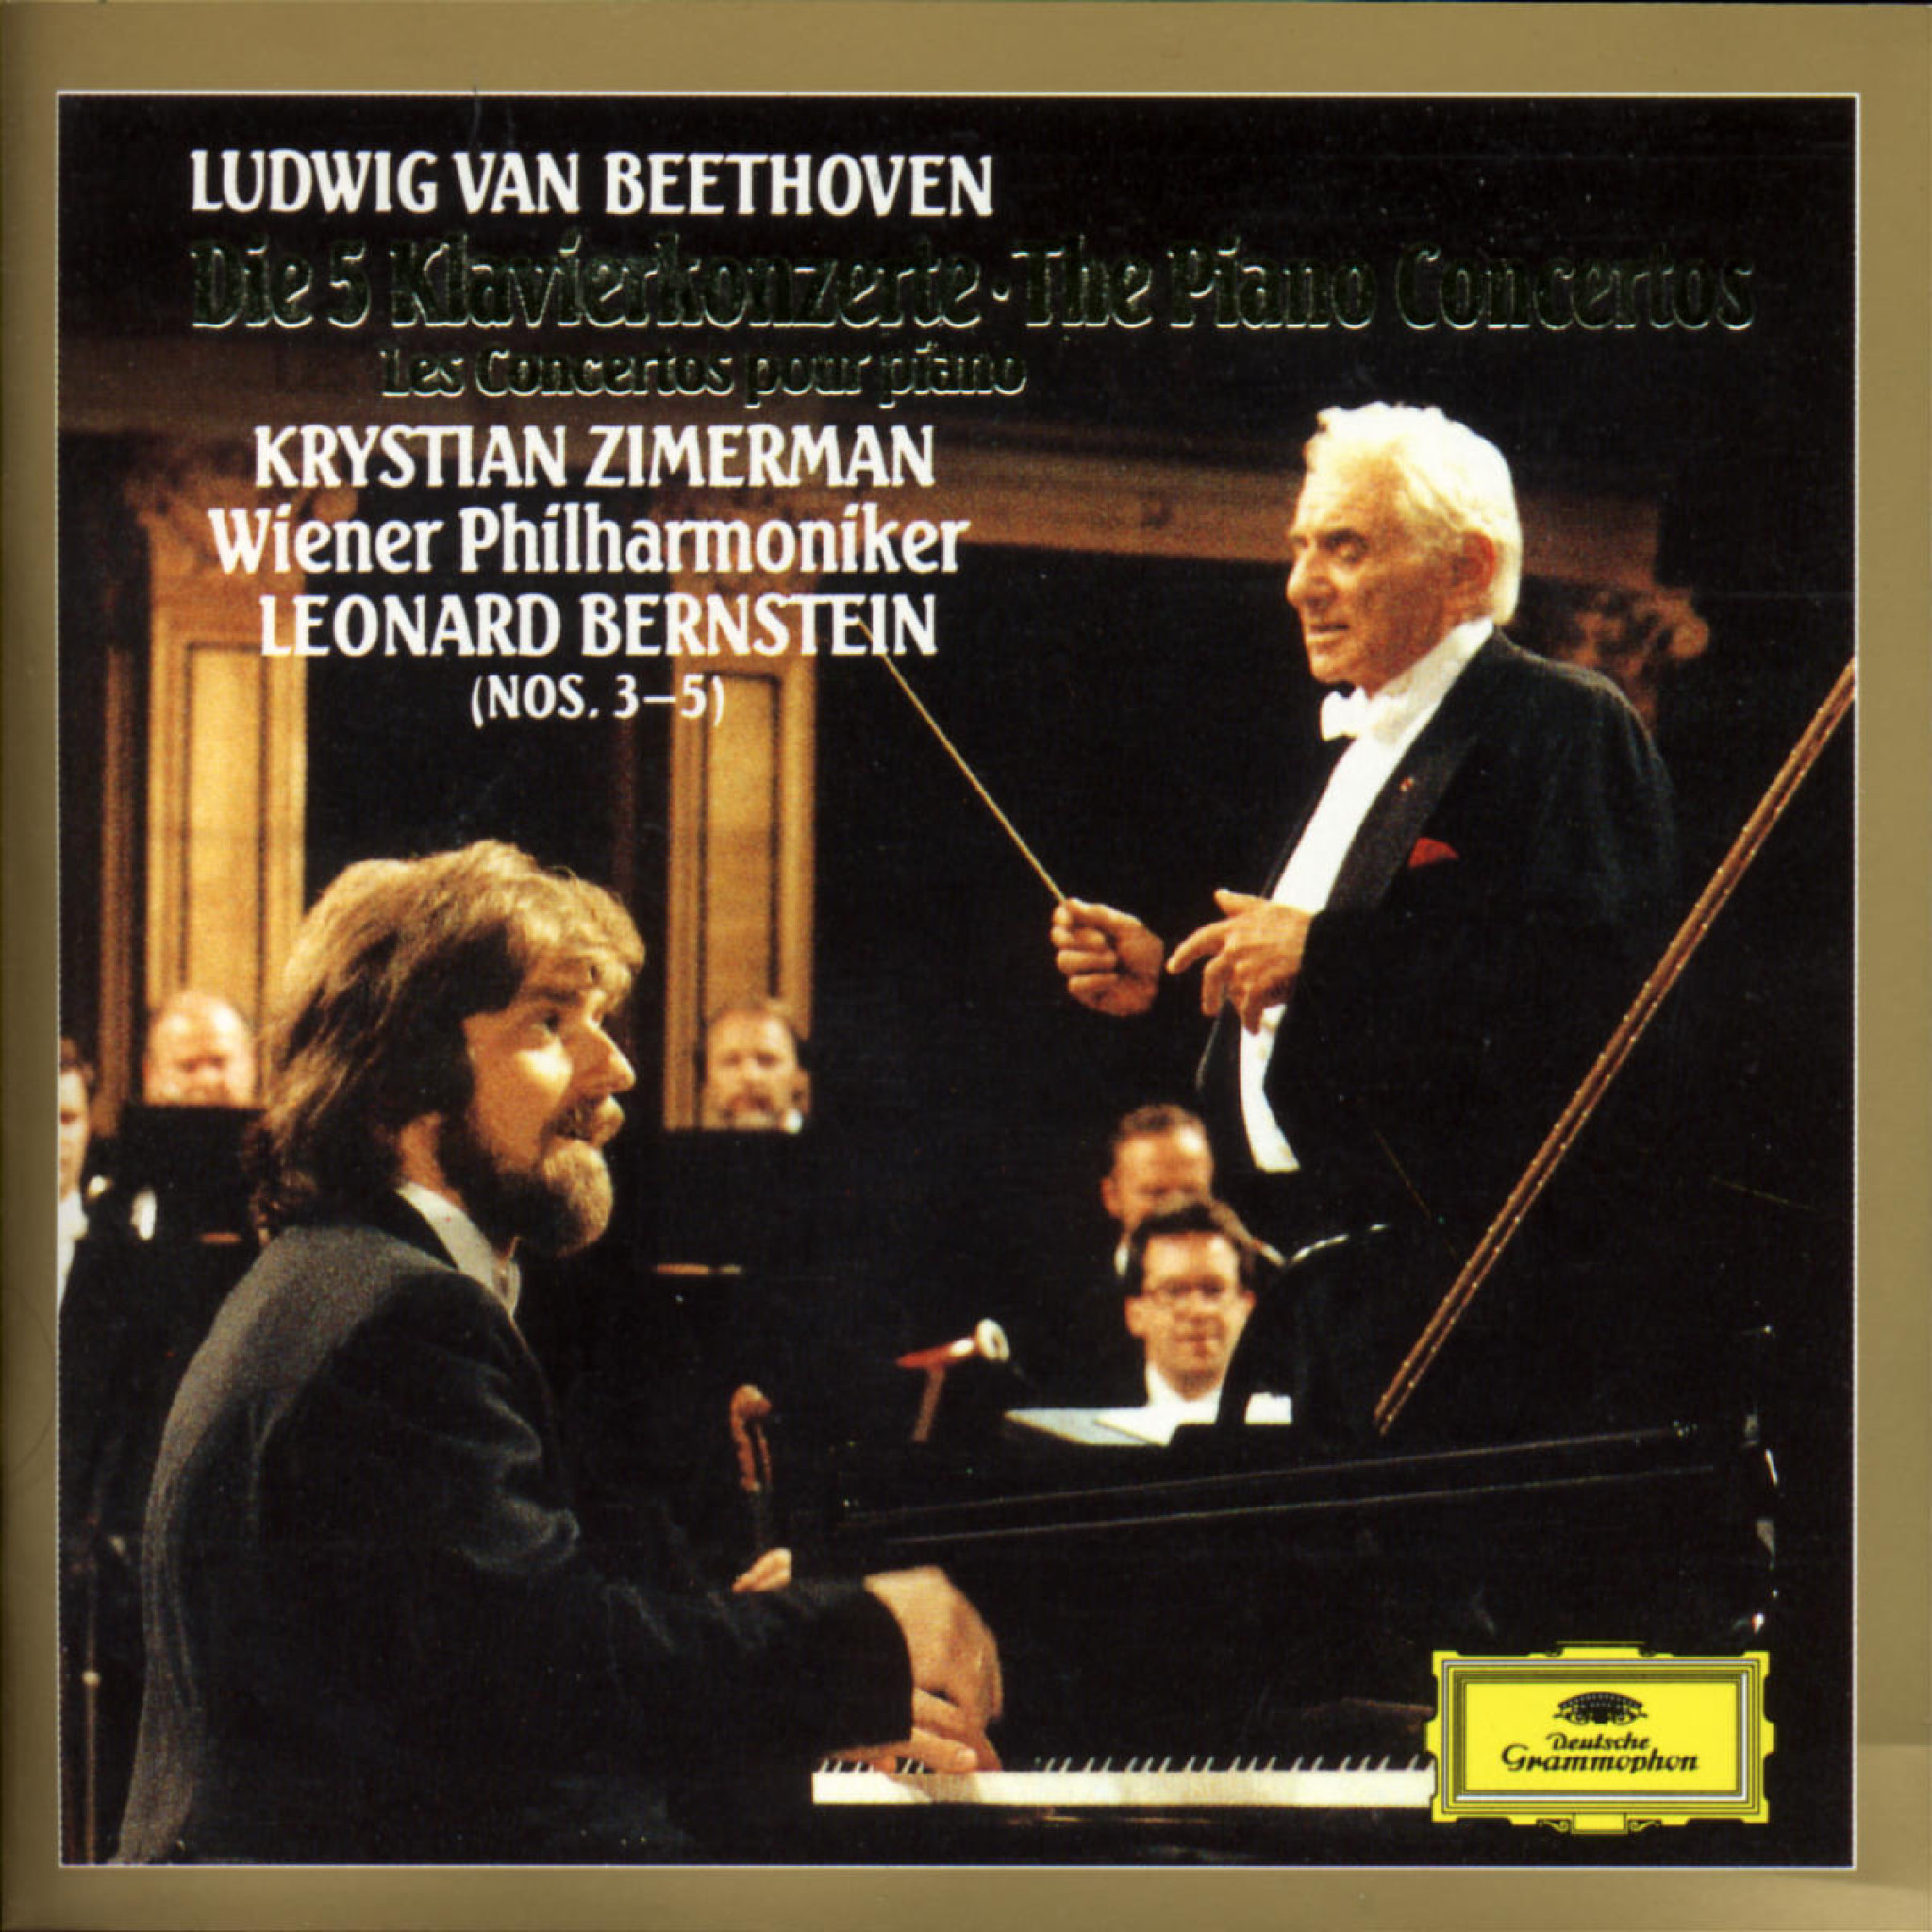 Beethoven: Concertos for Piano and Orchestra 0028943546720